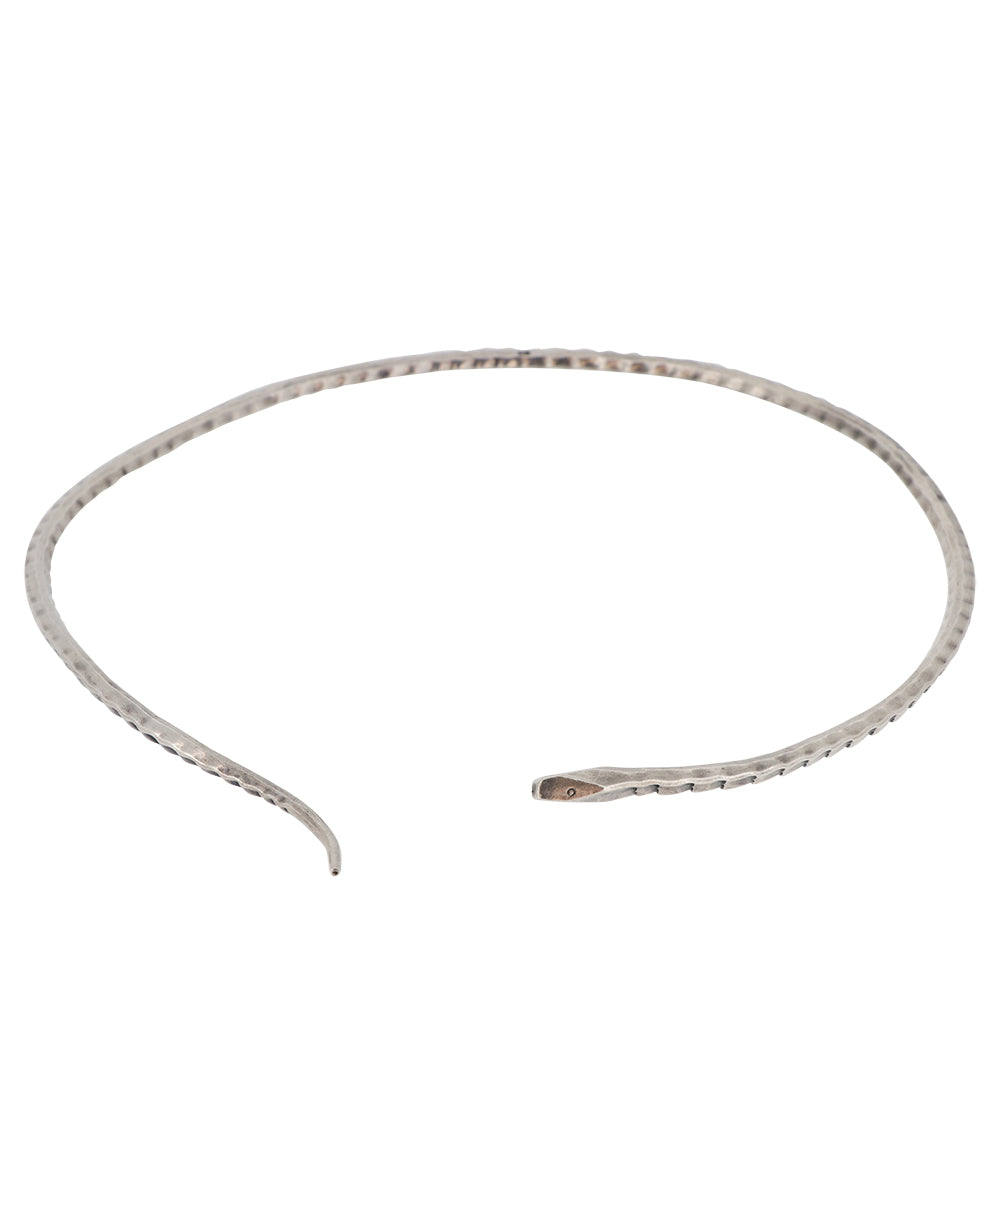 Hill-Tribe fine silver collar necklace with a snake design, handcrafted in Laos